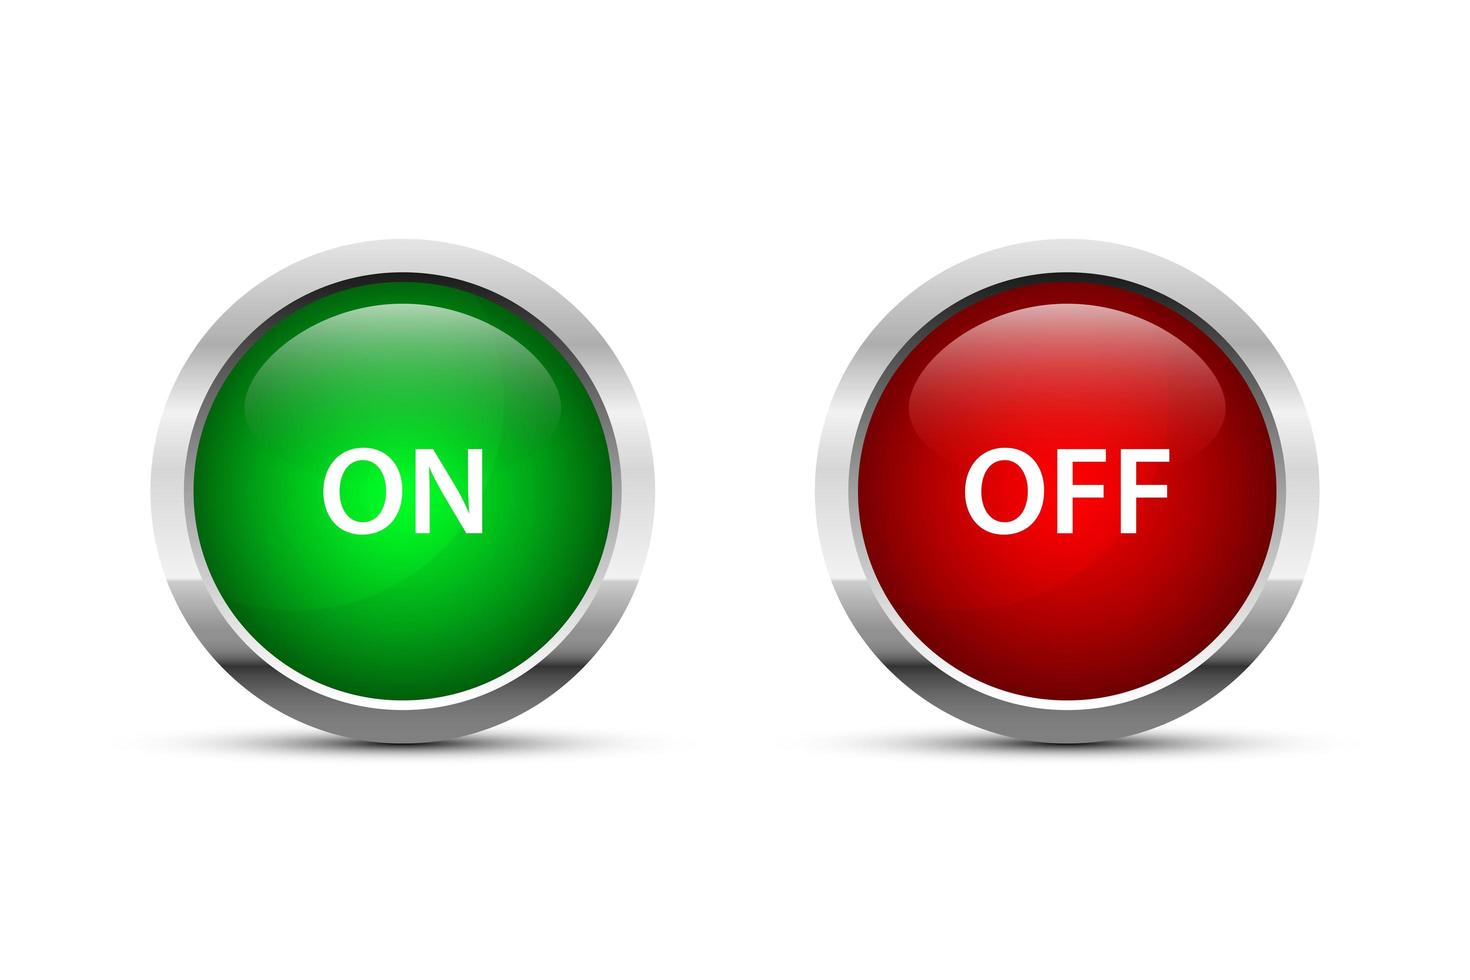 On and off button vector design illustration isolated on white background